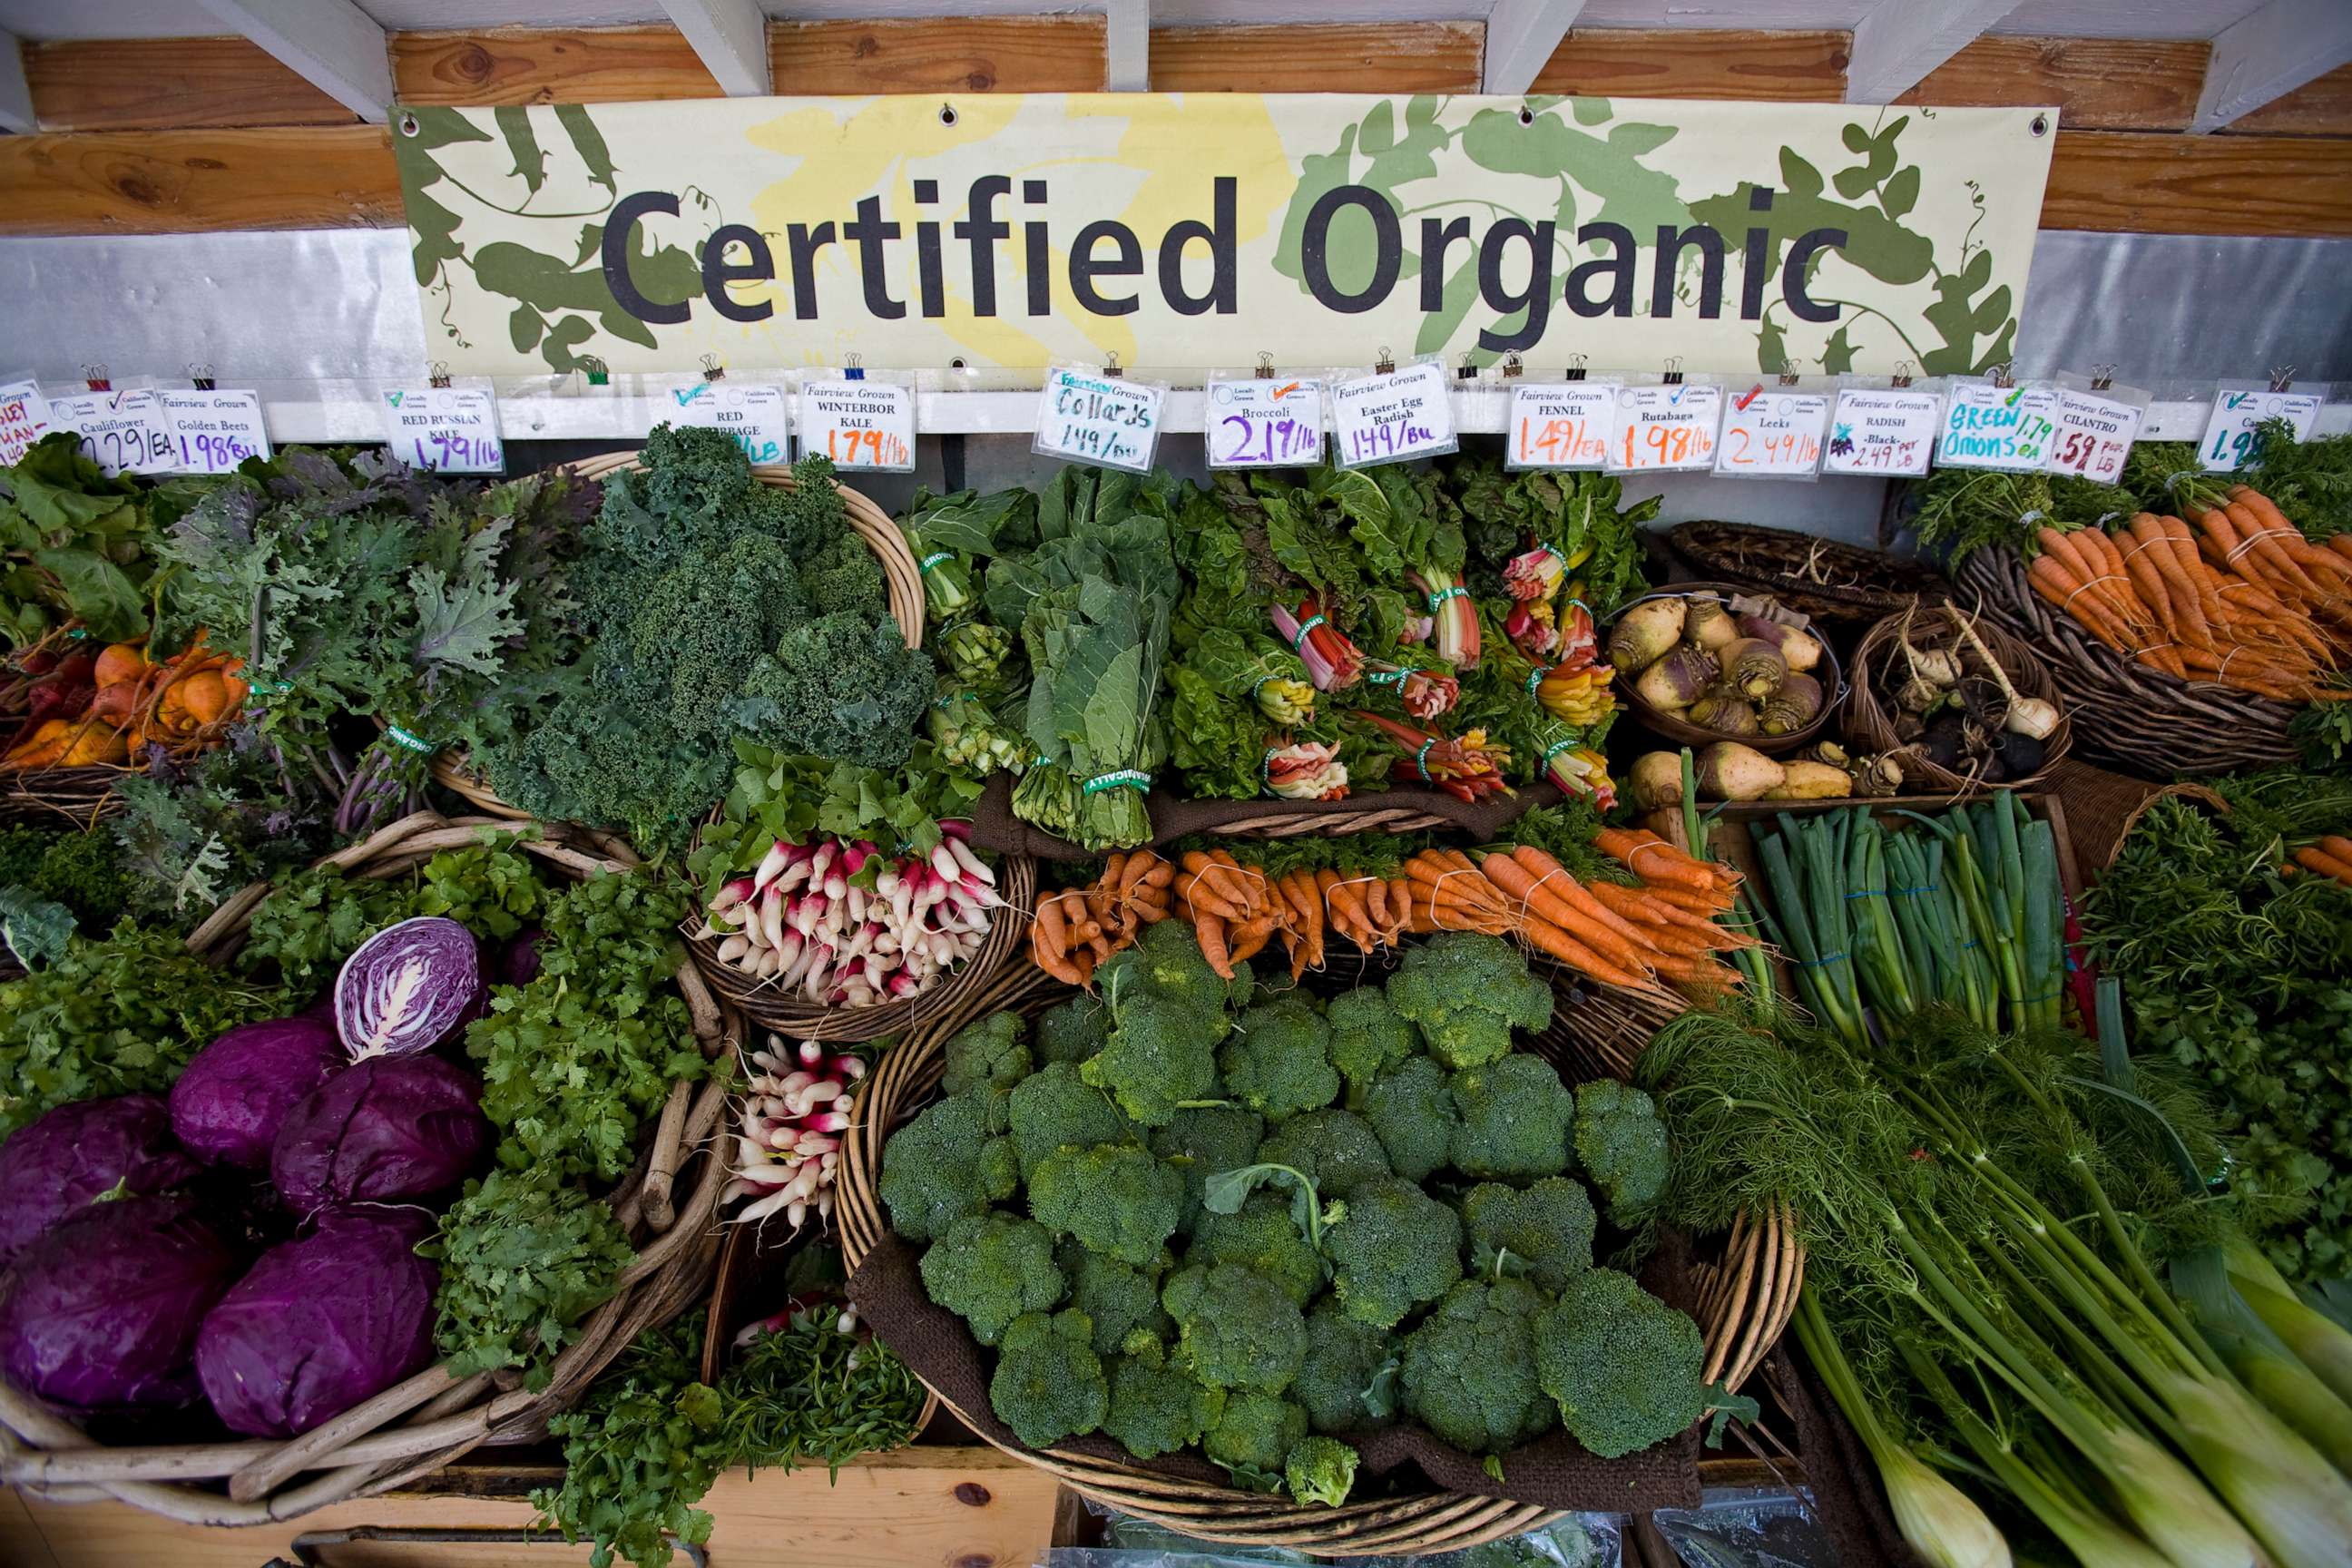 PHOTO: An organic food stand is shown at The Center for Urban Agriculture at Fairview Gardens in Goleta, Calif.